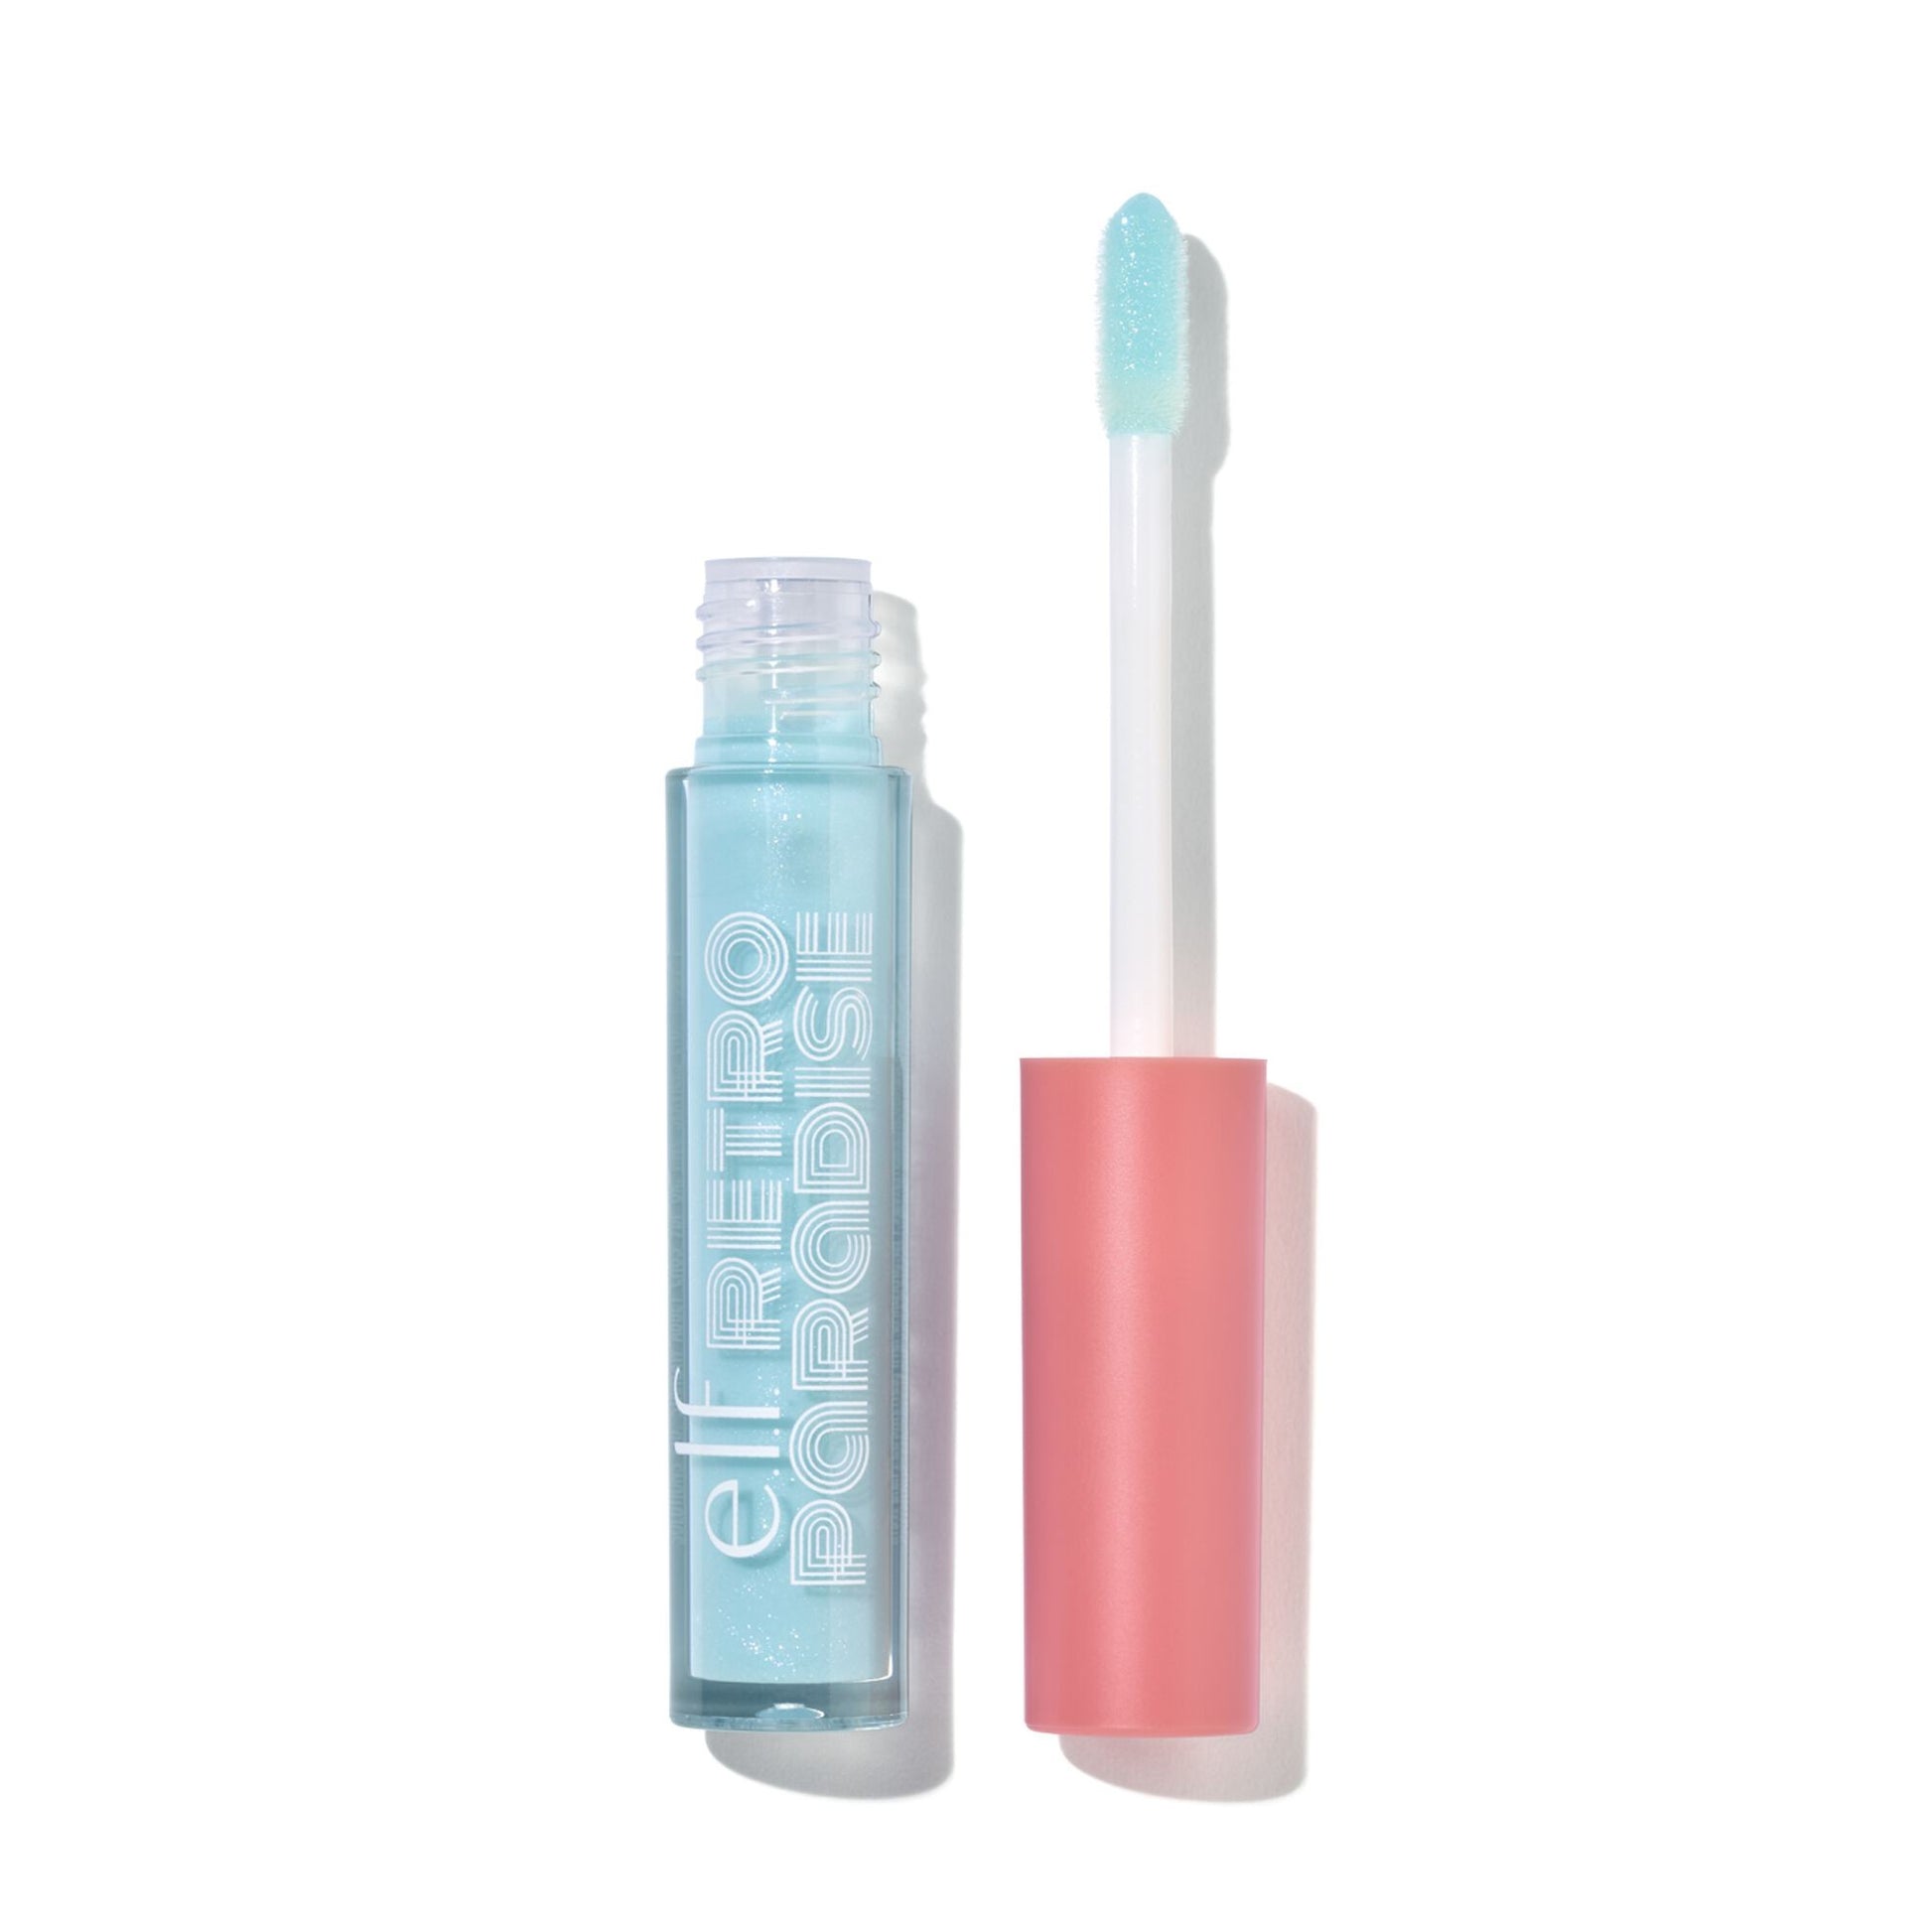 E.L.F Dream On Lip Gloss - Electric Lemonade 2.5ml This Nourishing, creamy lip gloss with sheer, iridescent shimmer – basically, what lip gloss dreams are made of. This lip gloss gives your lips a kiss of color with an irresistible tropical scent.  Electric Lemonade - Appears pastel blue, but applies clear with multicolor iridescent shimmer.